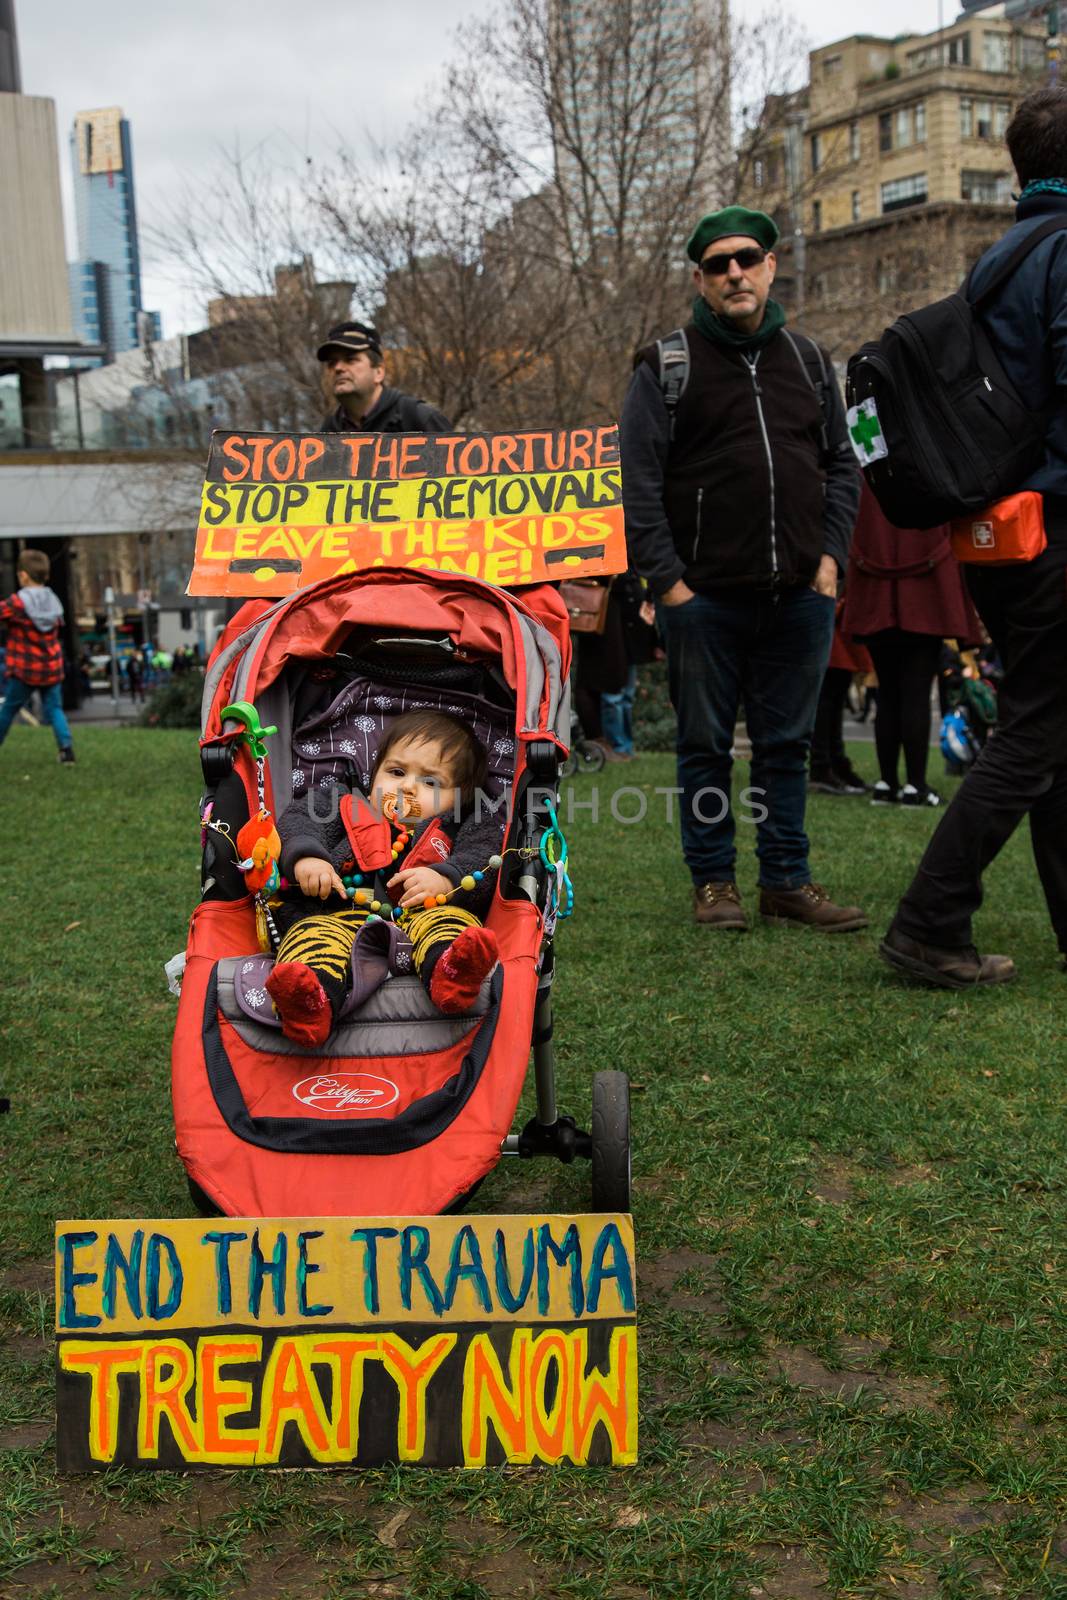 Rally Against Child Detention and Torture by davidhewison